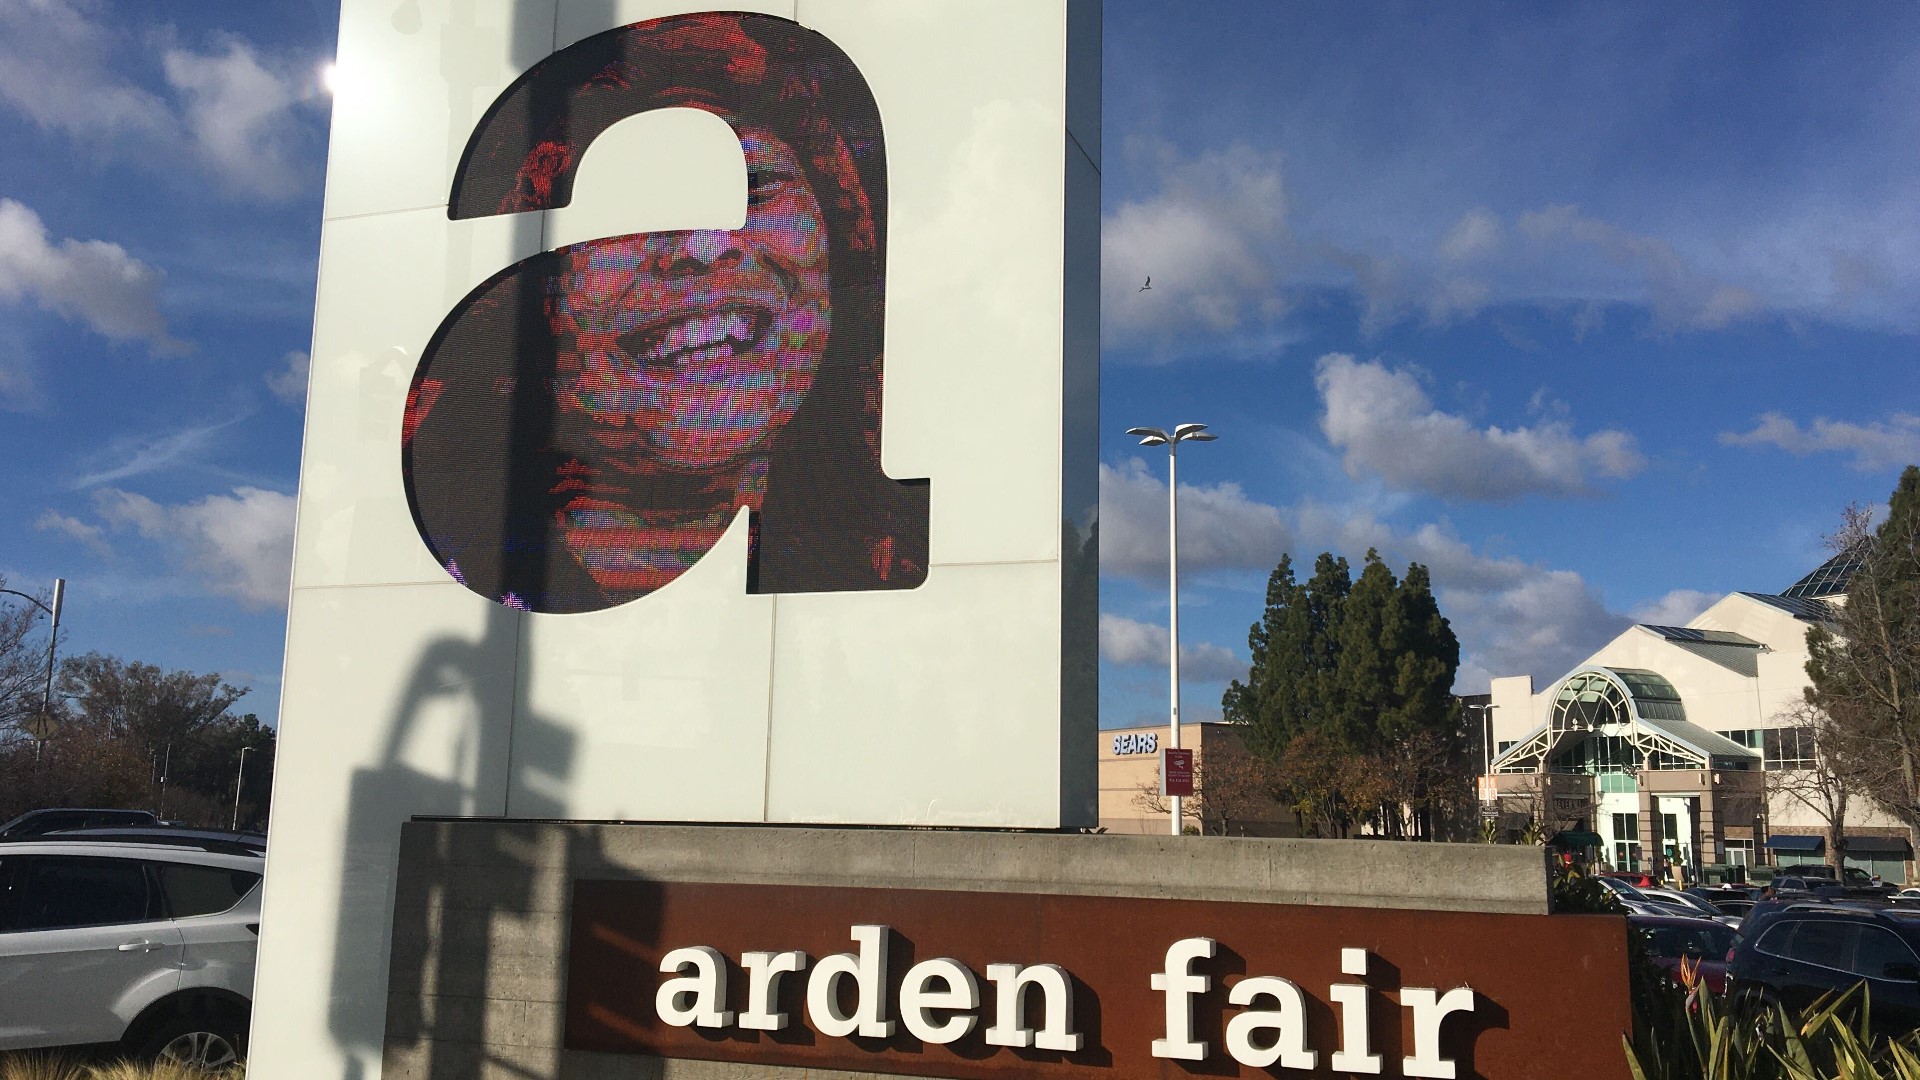 The day after Christmas is one of the shopping busiest days at the Arden Fair Mall. Here is how the mall is keeping people safe as COVID-19 cases rise.